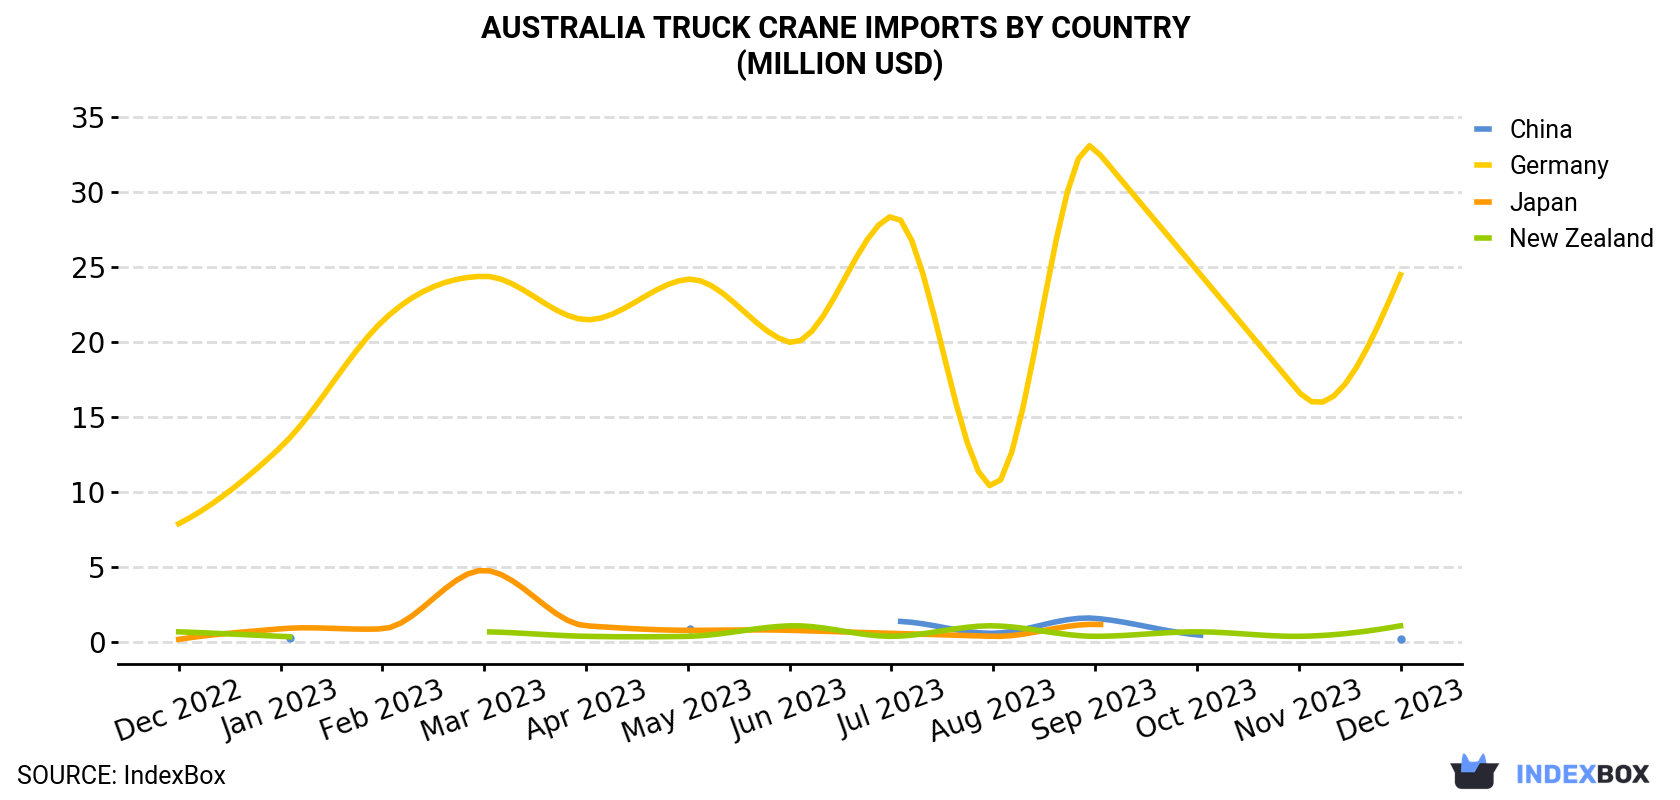 Australia Truck Crane Imports By Country (Million USD)